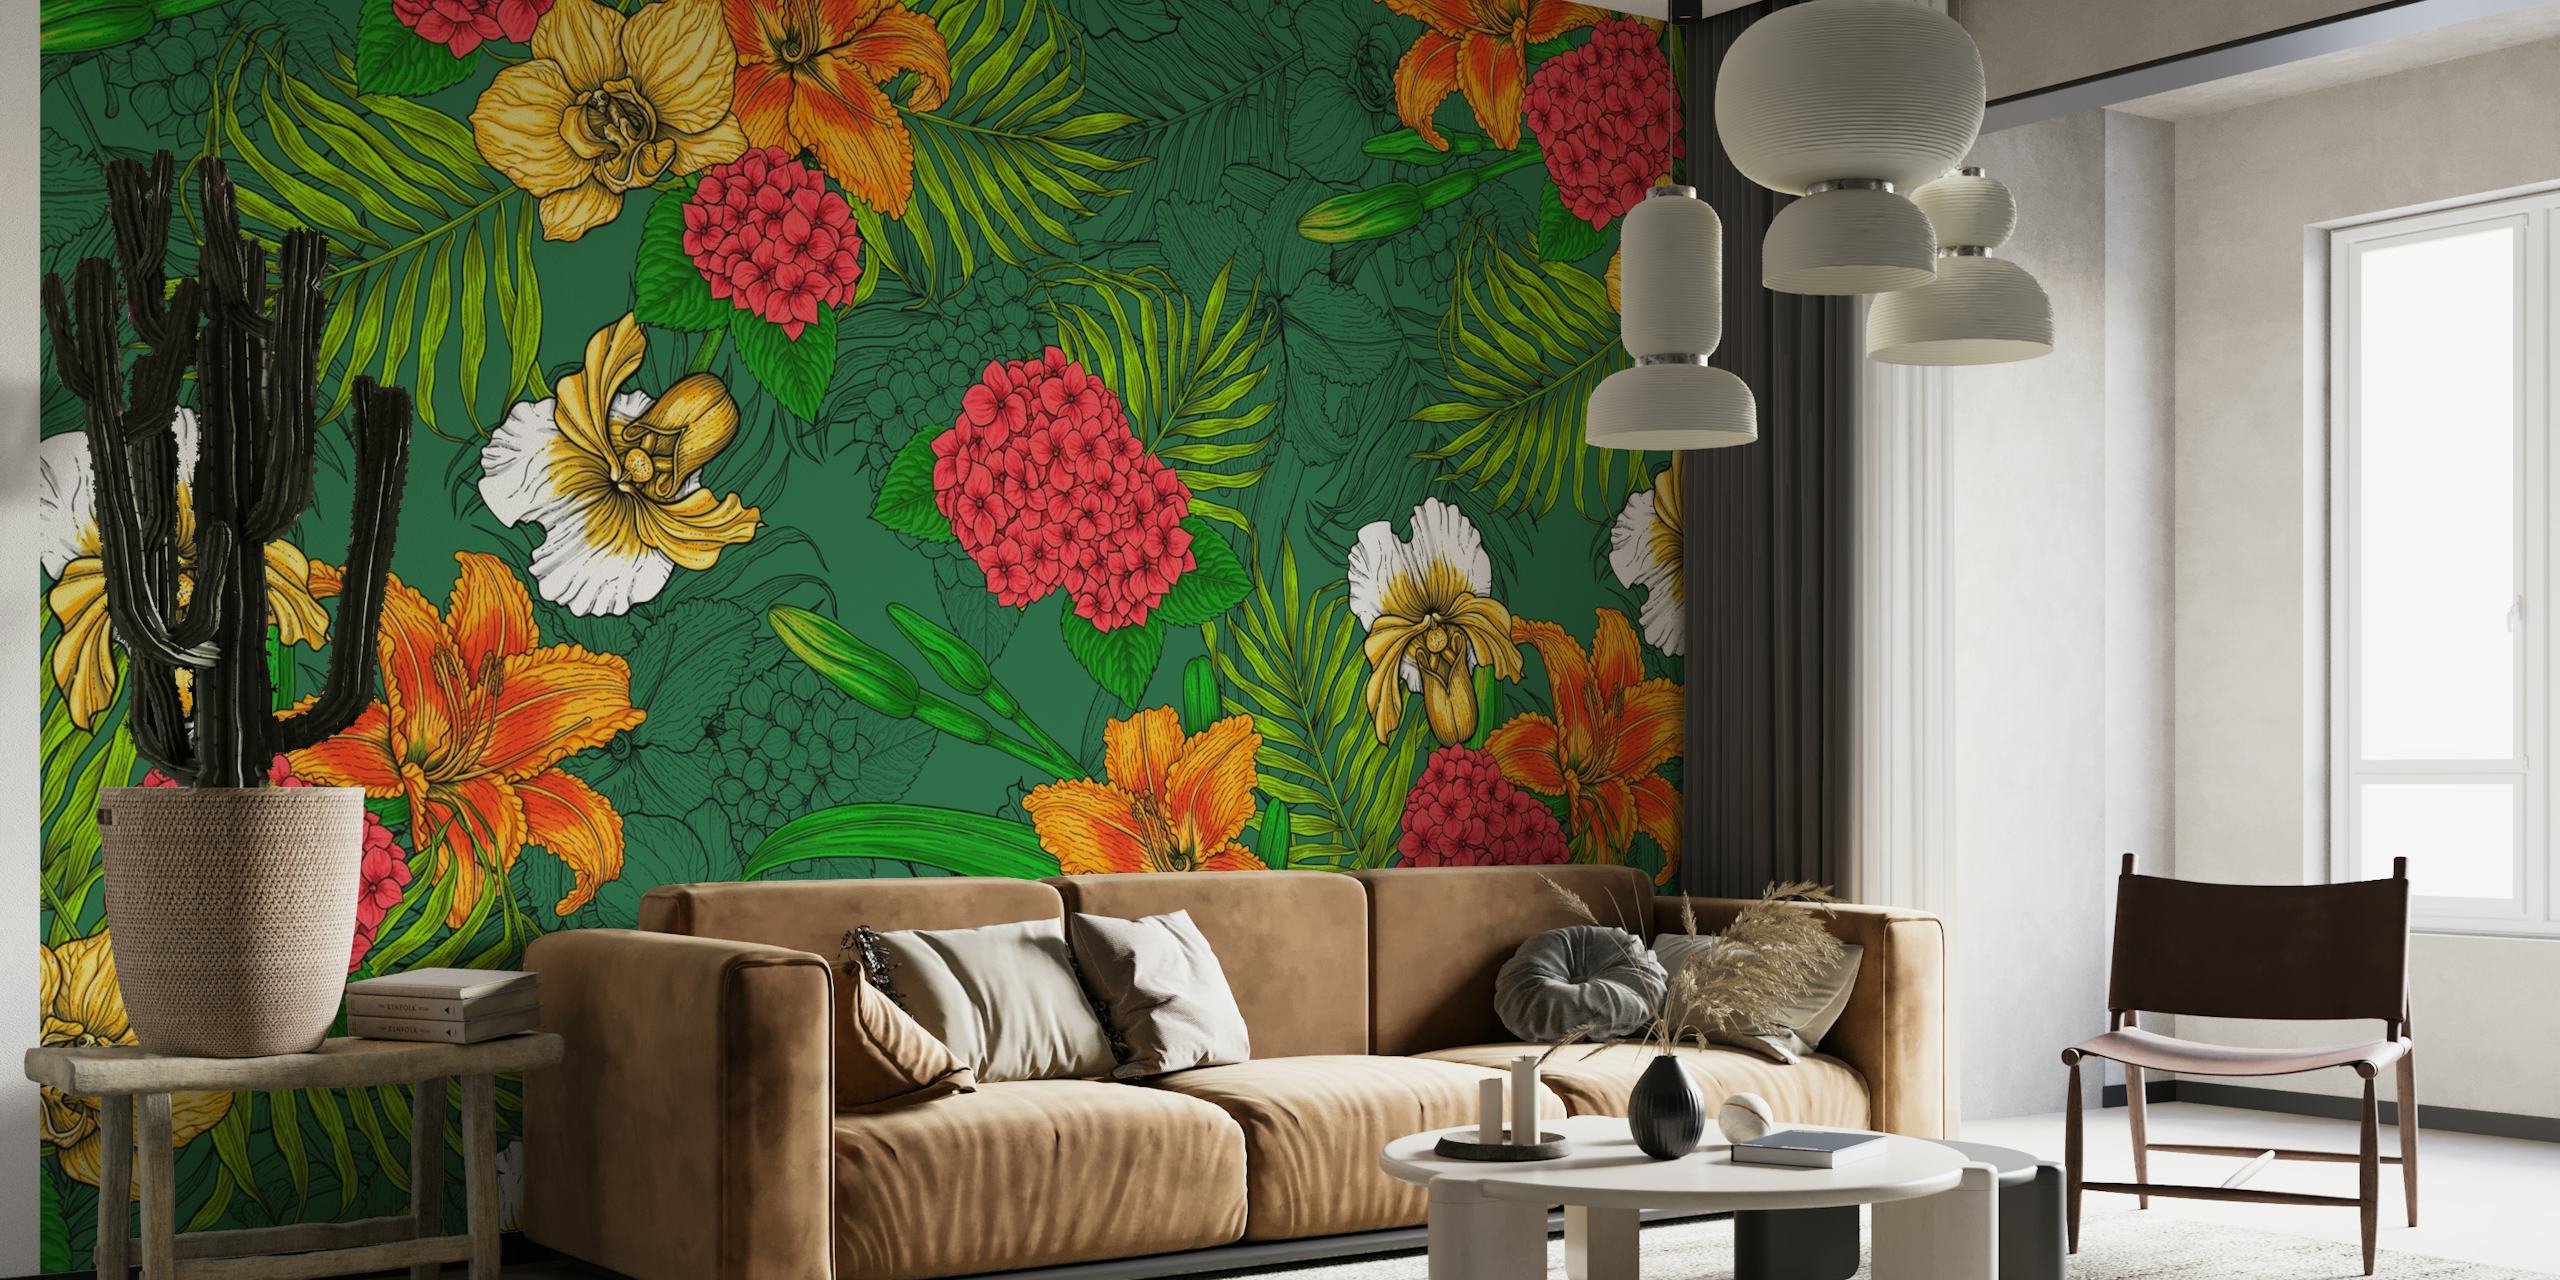 Vibrant tropical floral pattern wall mural with orange and yellow flowers and green foliage.